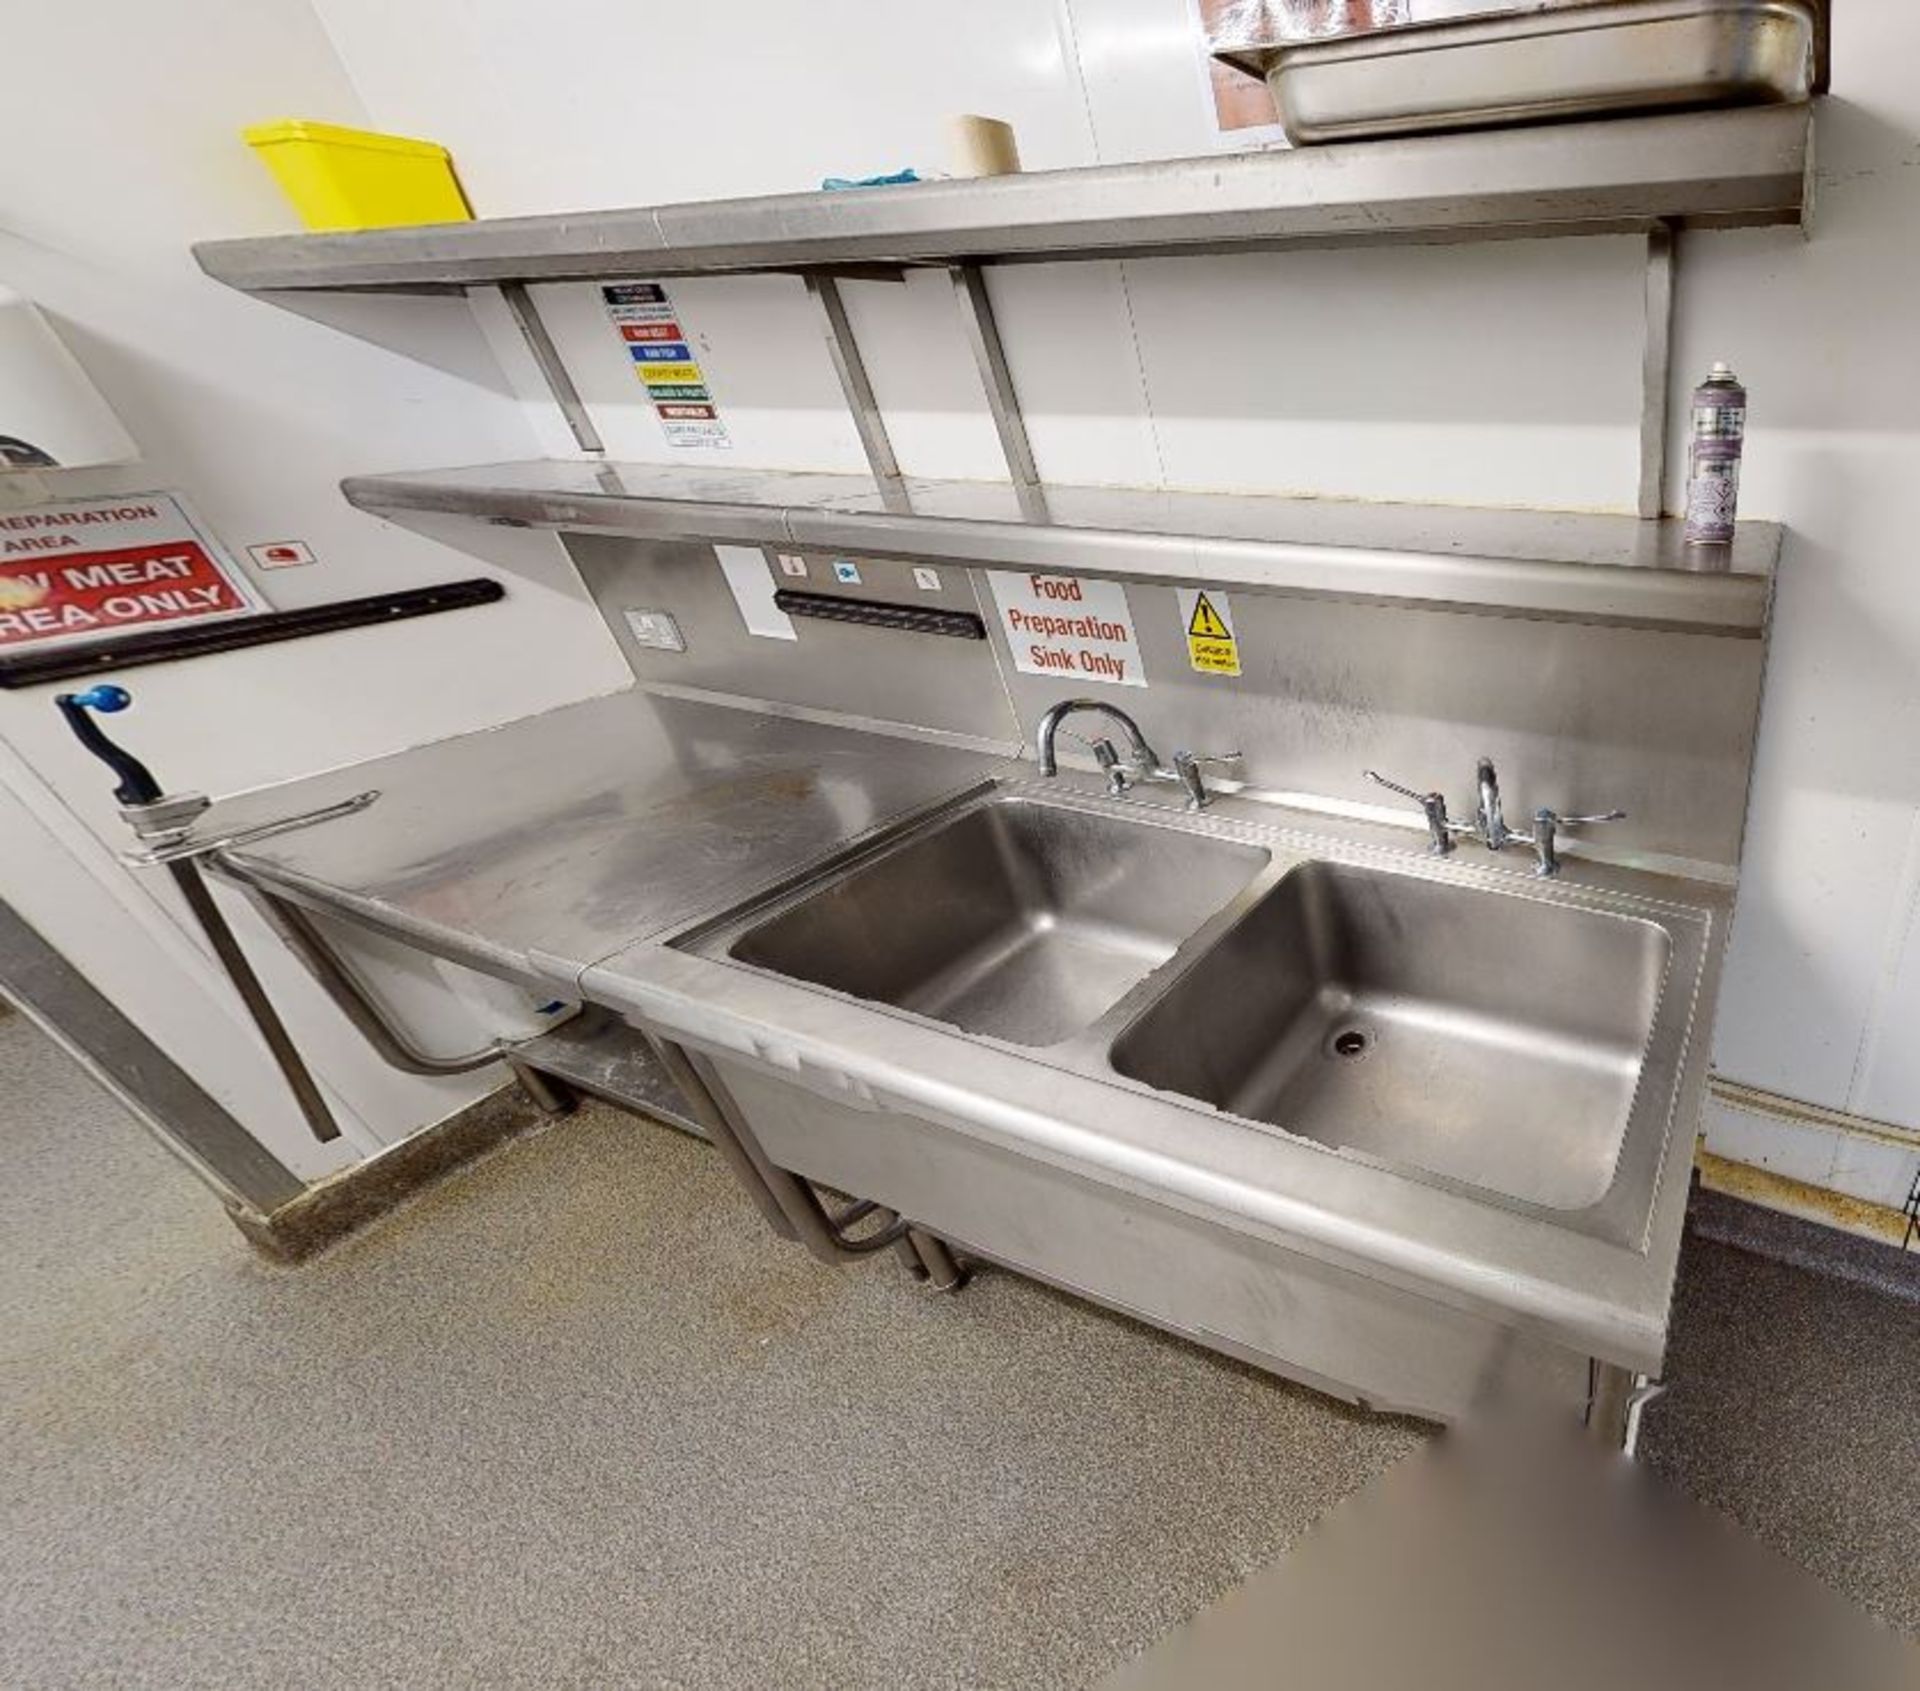 1 x Stainless Steel Commercial Wash Stand With Twin Sink Basins, Mixer Taps, Overhead Shelves, - Image 2 of 10